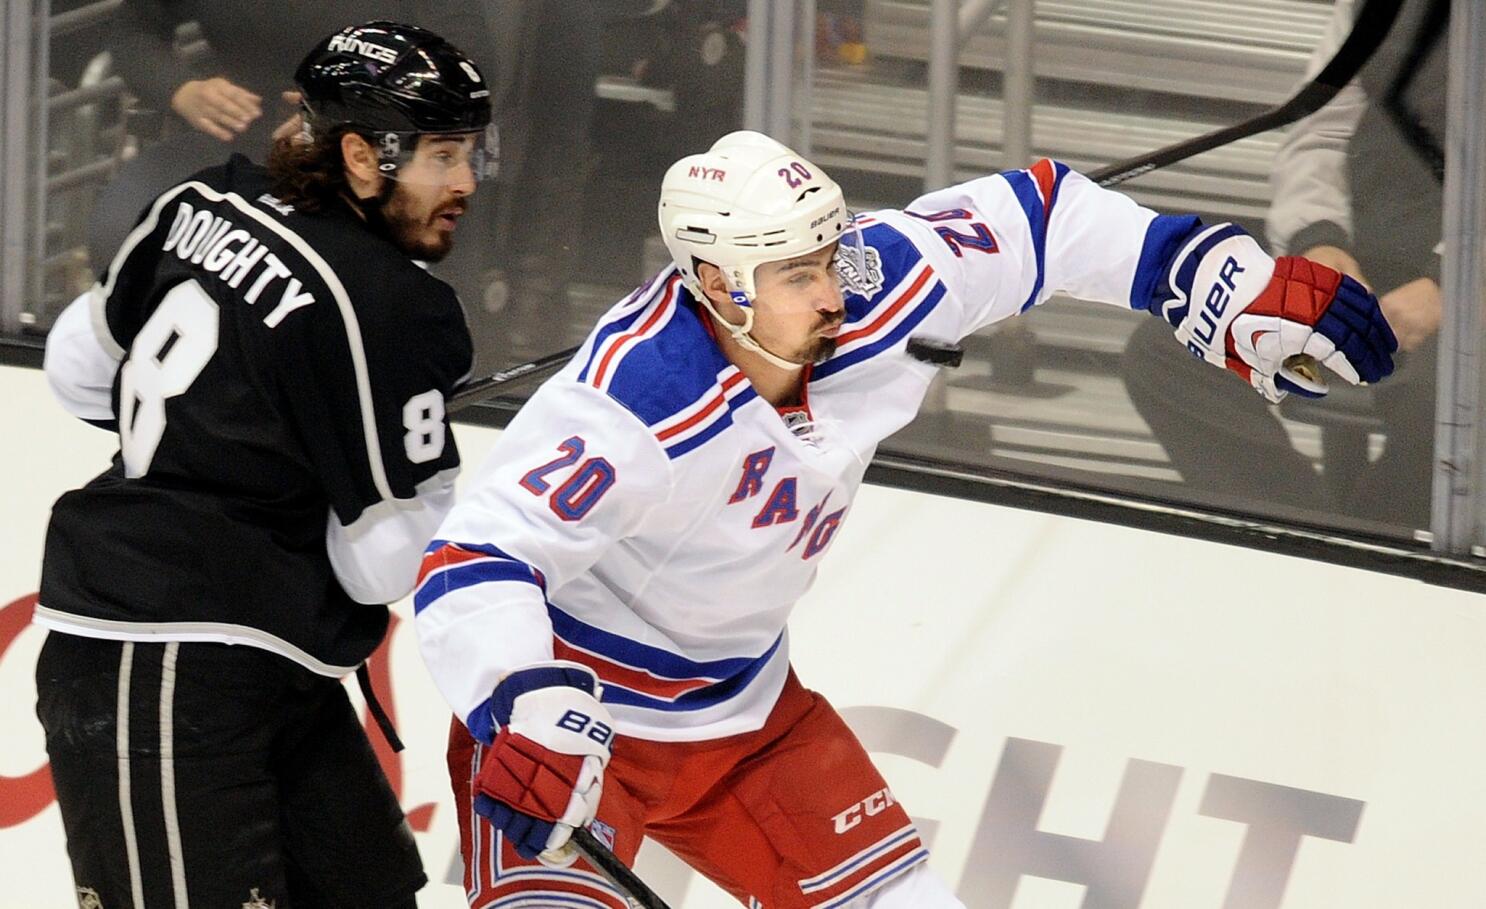 Report: Kreider signs with Rangers, will join team Wednesday - NBC